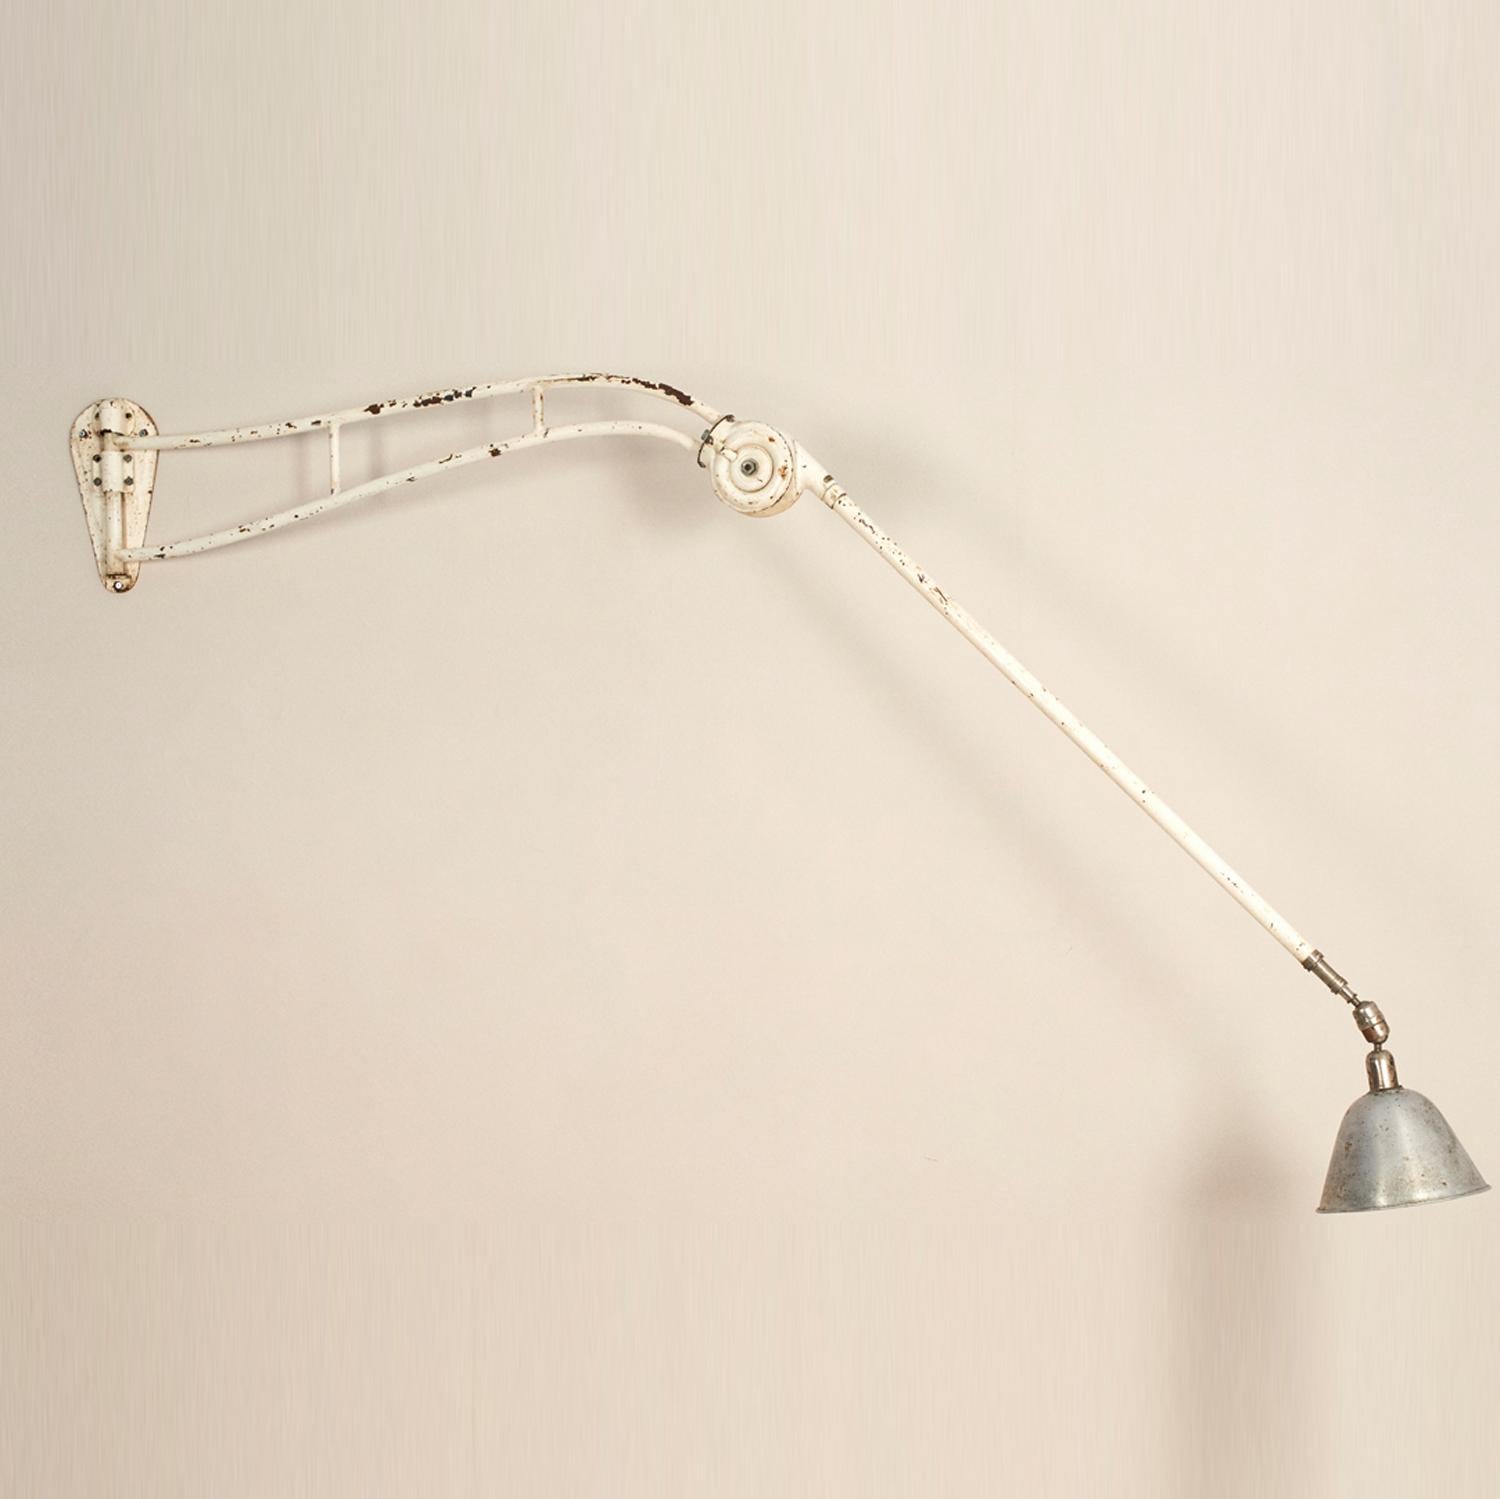 Monumental wall lamp designed by Johan Petter Johansson for Triplex, Sweden, fully adjustable and telescopic arm. White lacquered and chrome, nice original condition, marked and stamped, the central joint is still enough strong to support the arm in